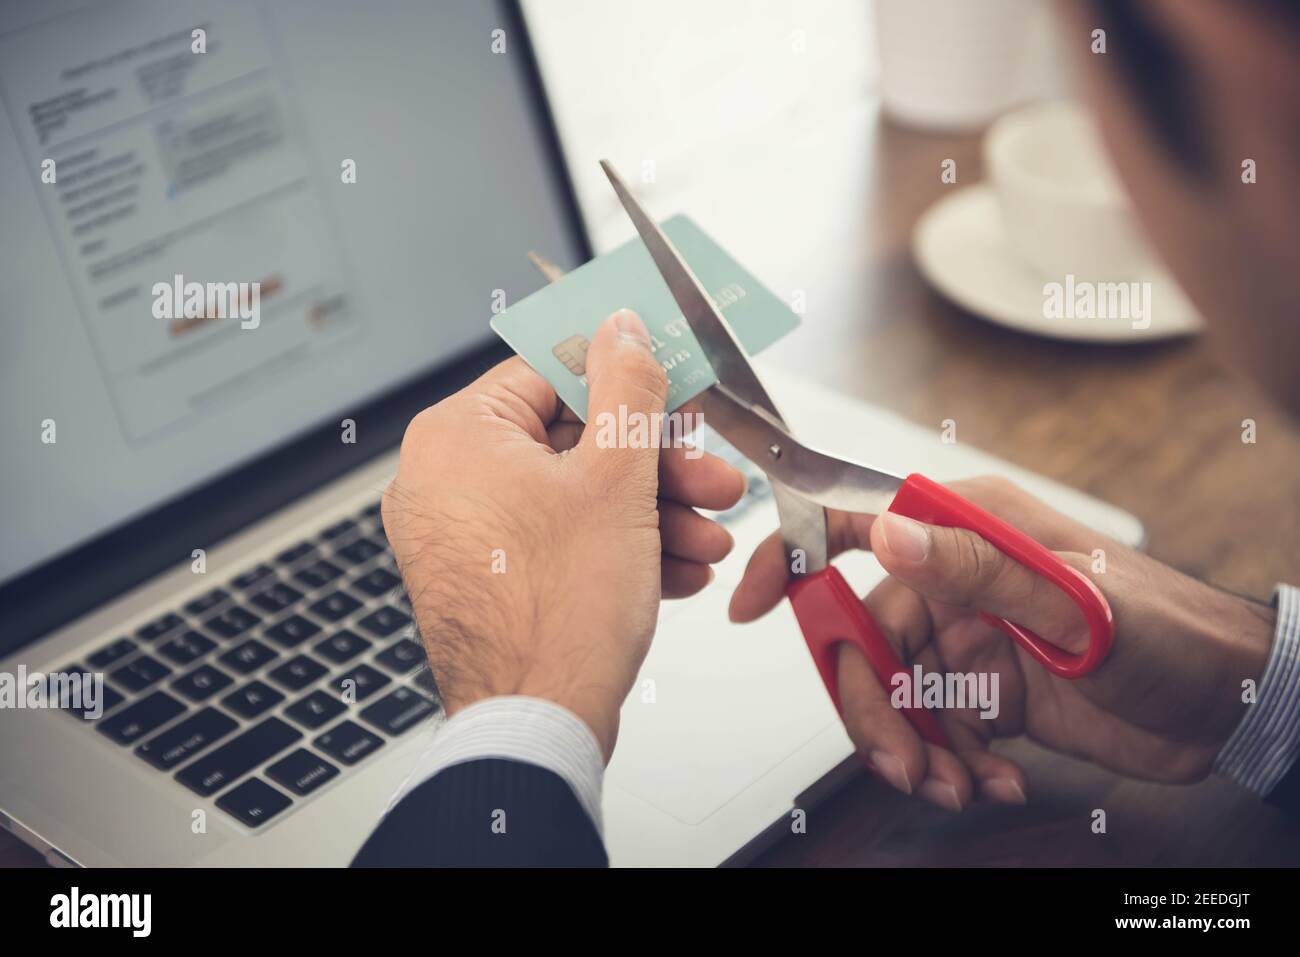 Businessman cutting a credit card that canceled by financial institute due to negligent usage Stock Photo